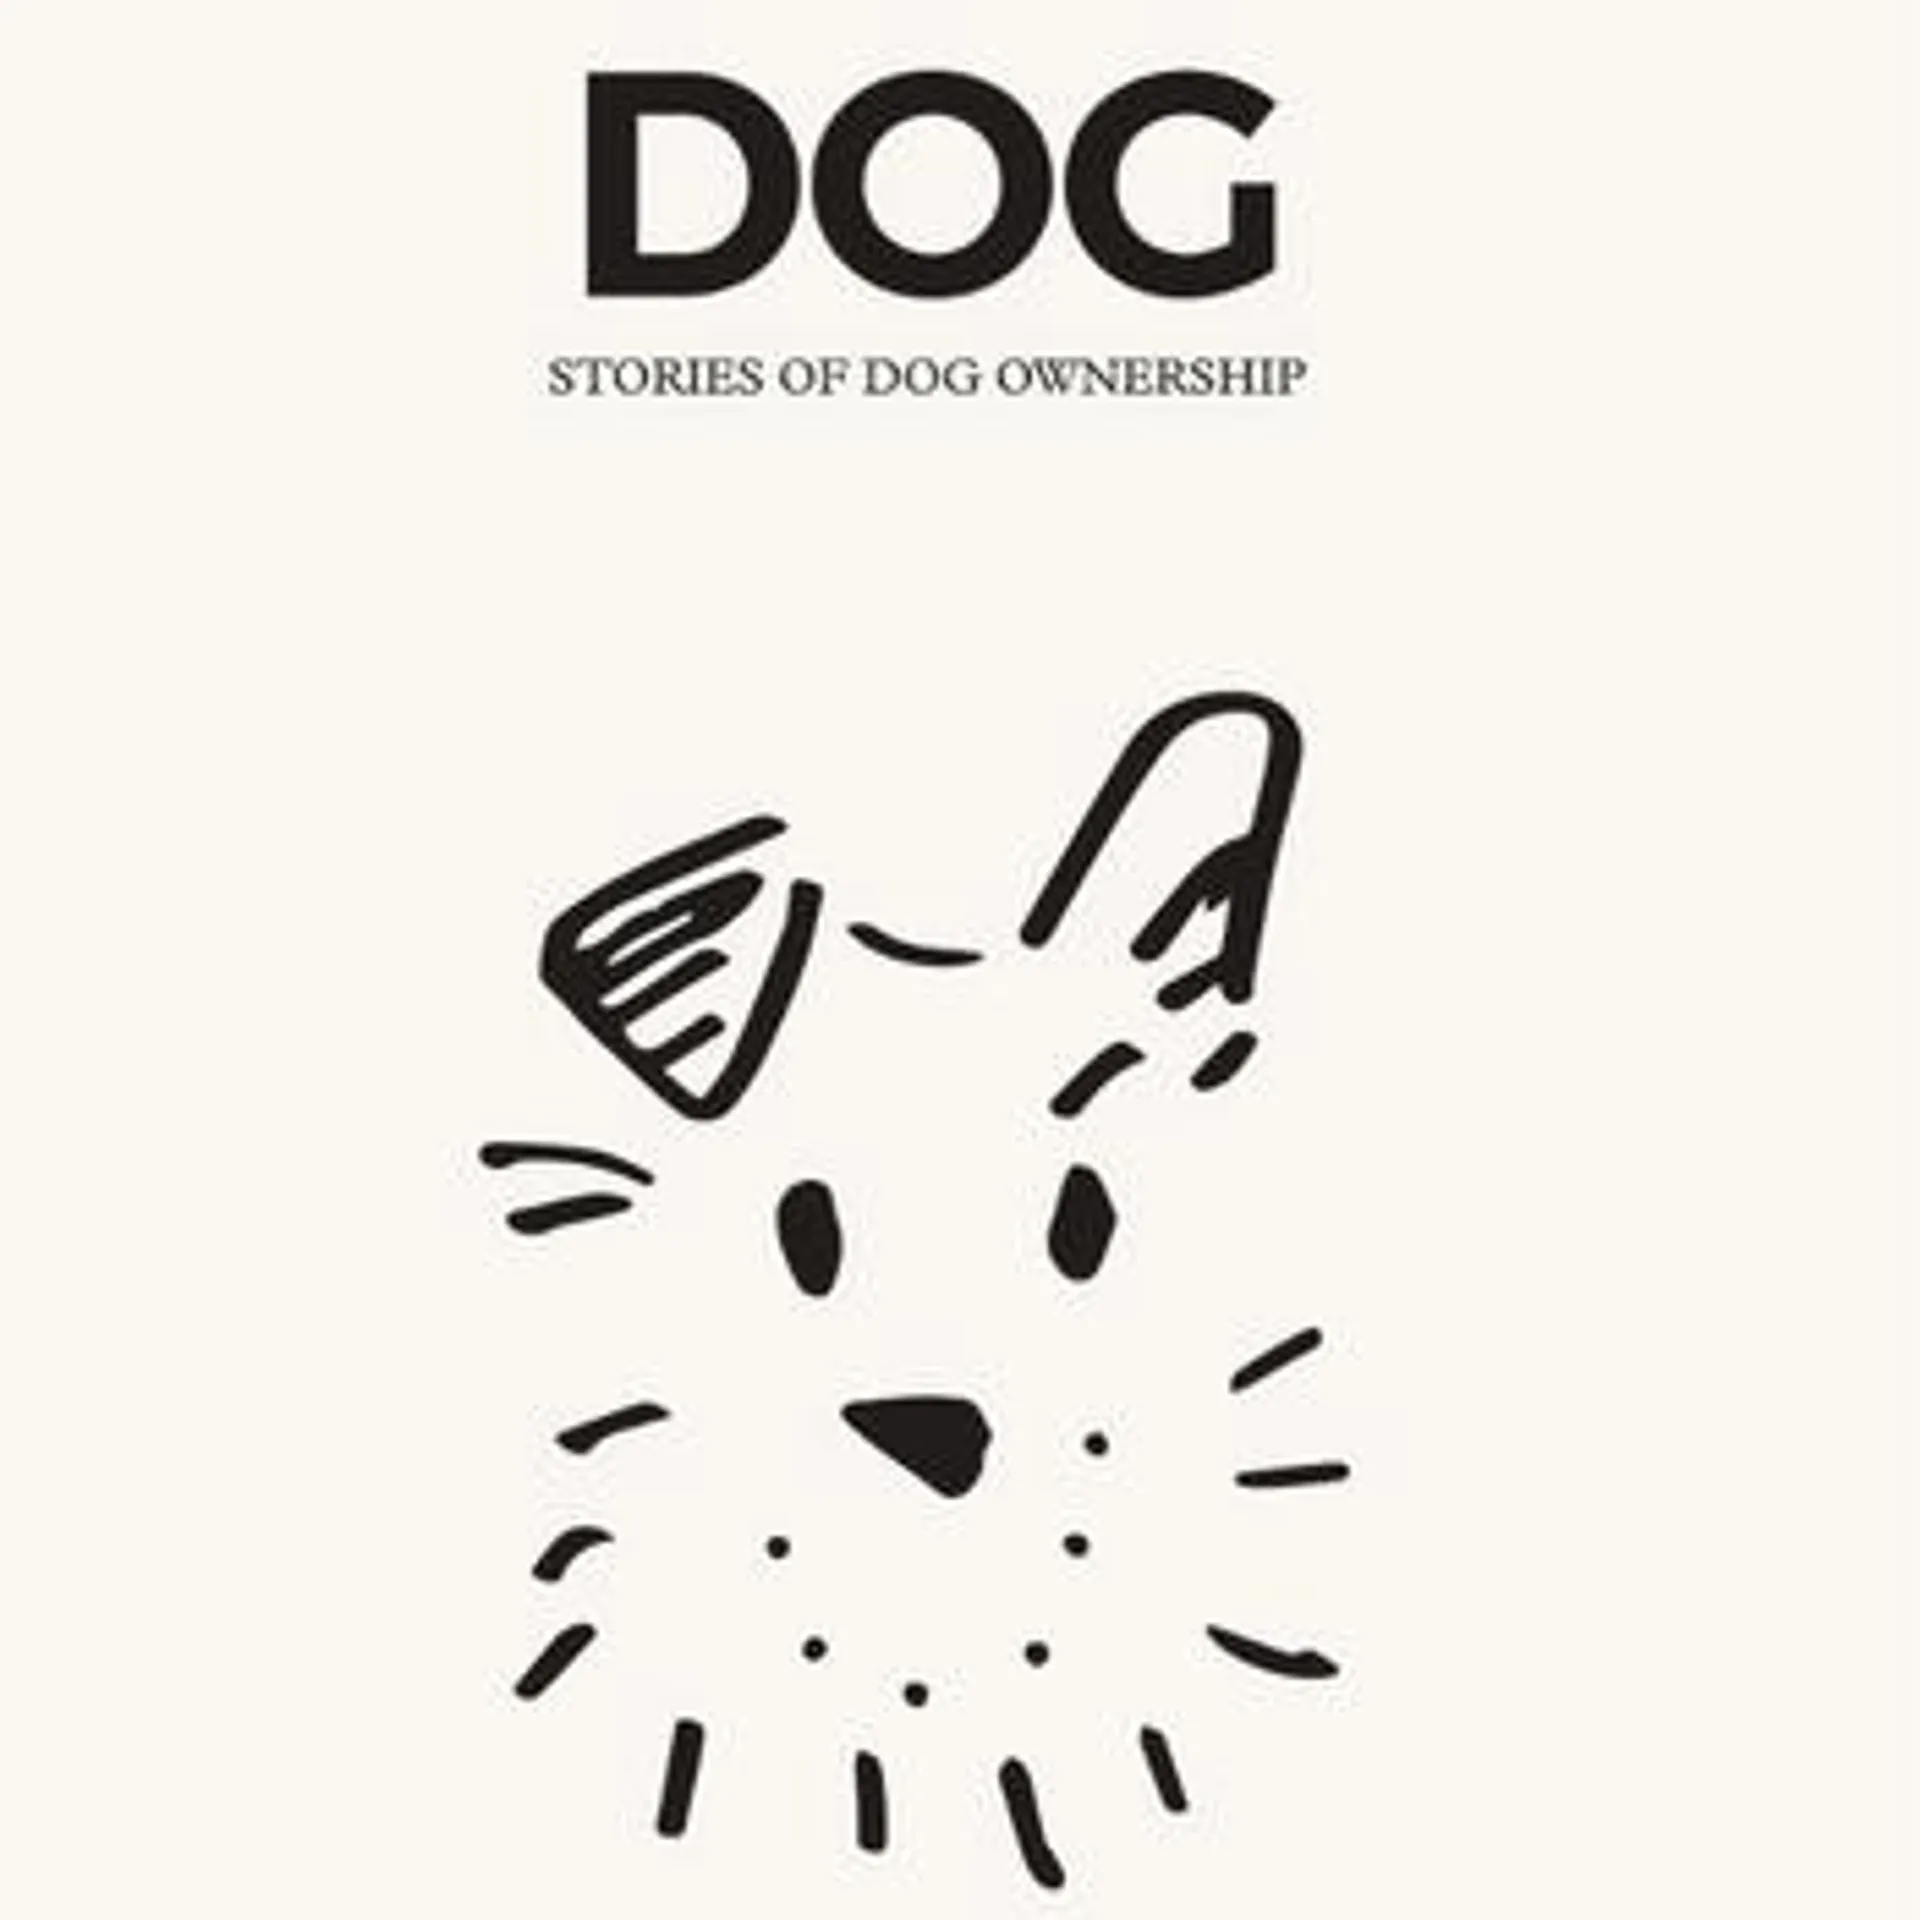 Stories of Dog Ownership